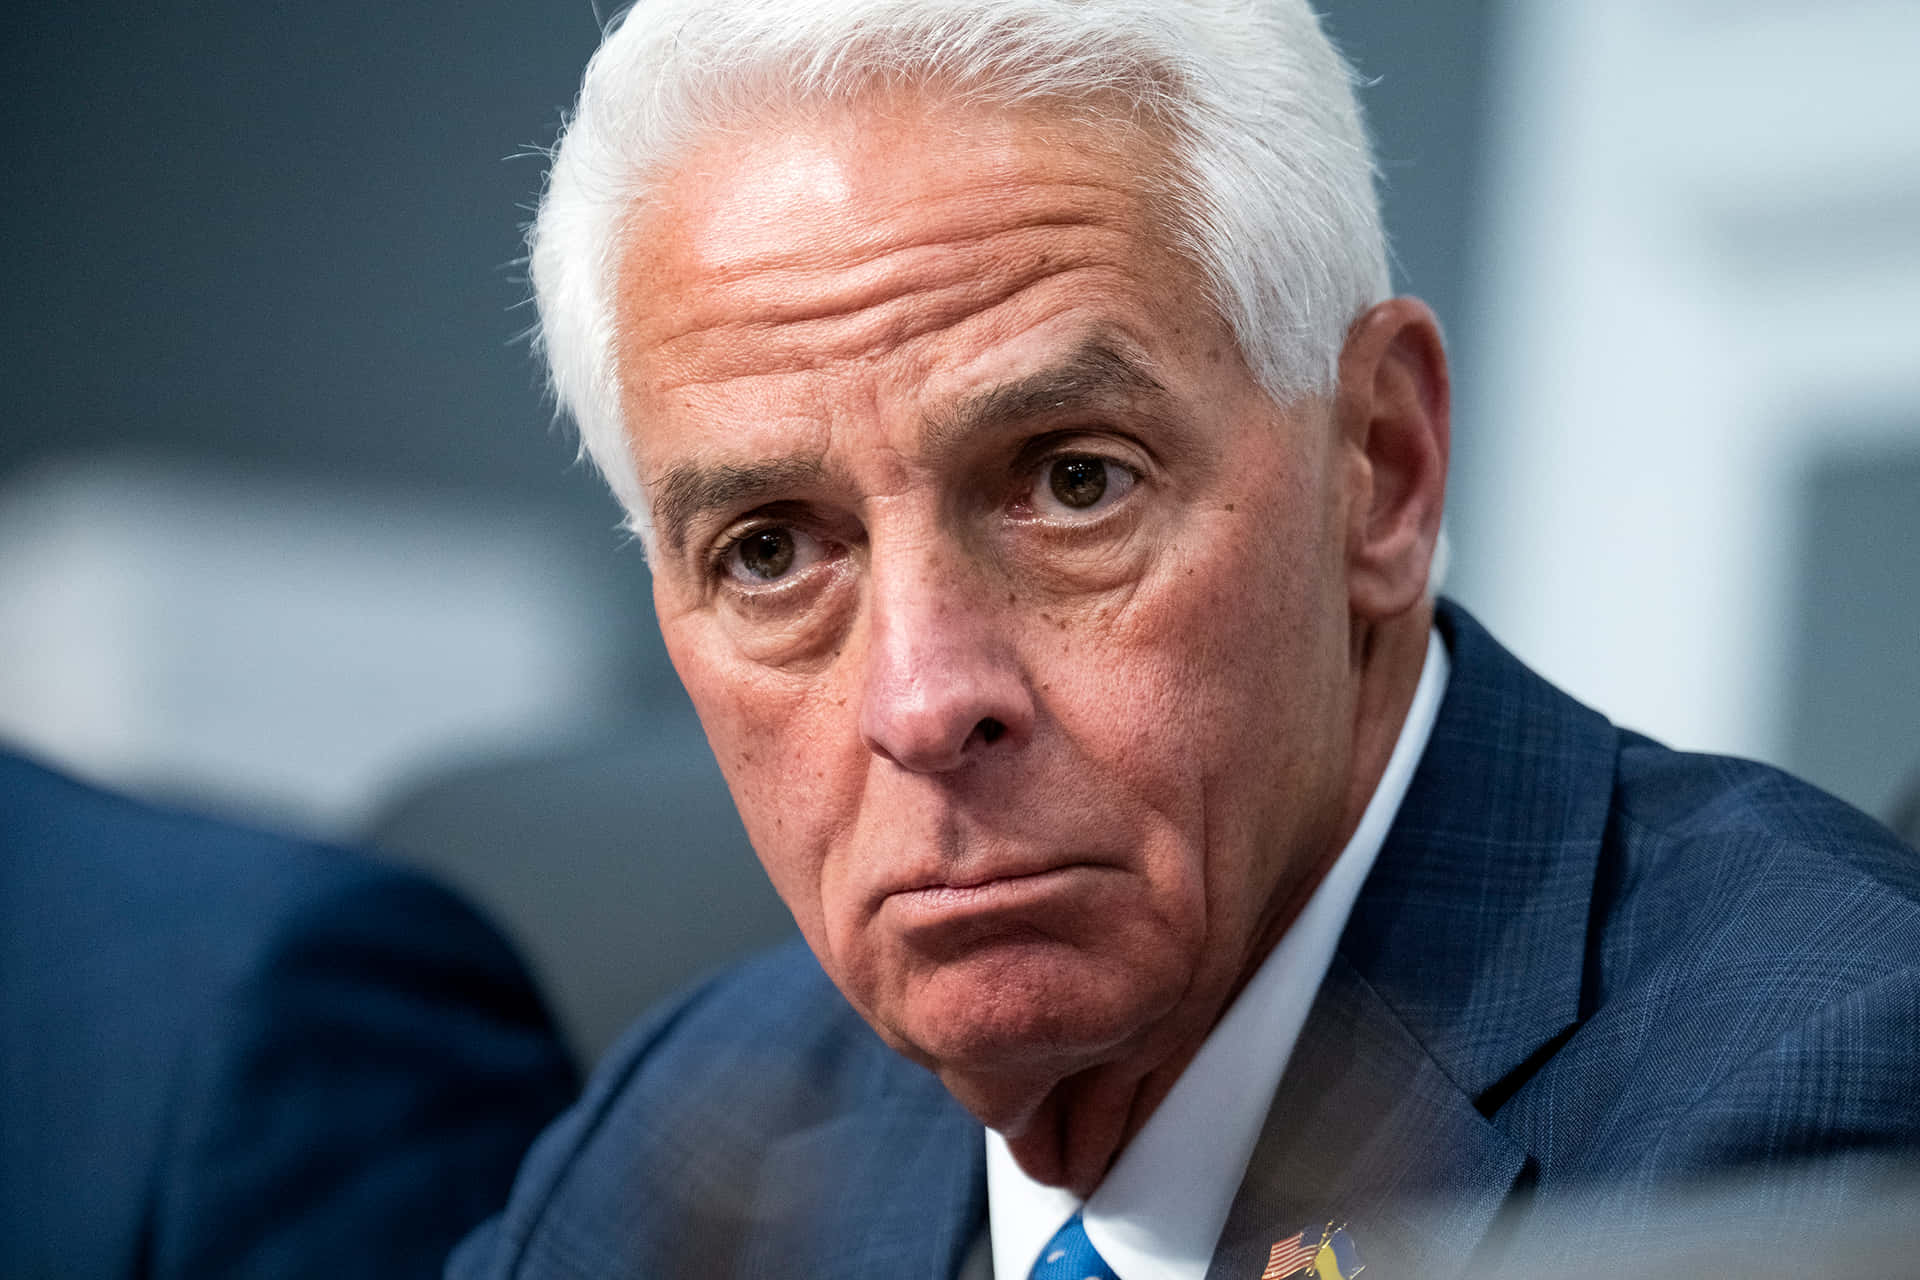 Charliecrist Allvarligt Arg Min. (charlie Crist Serious Angry Face) Wallpaper